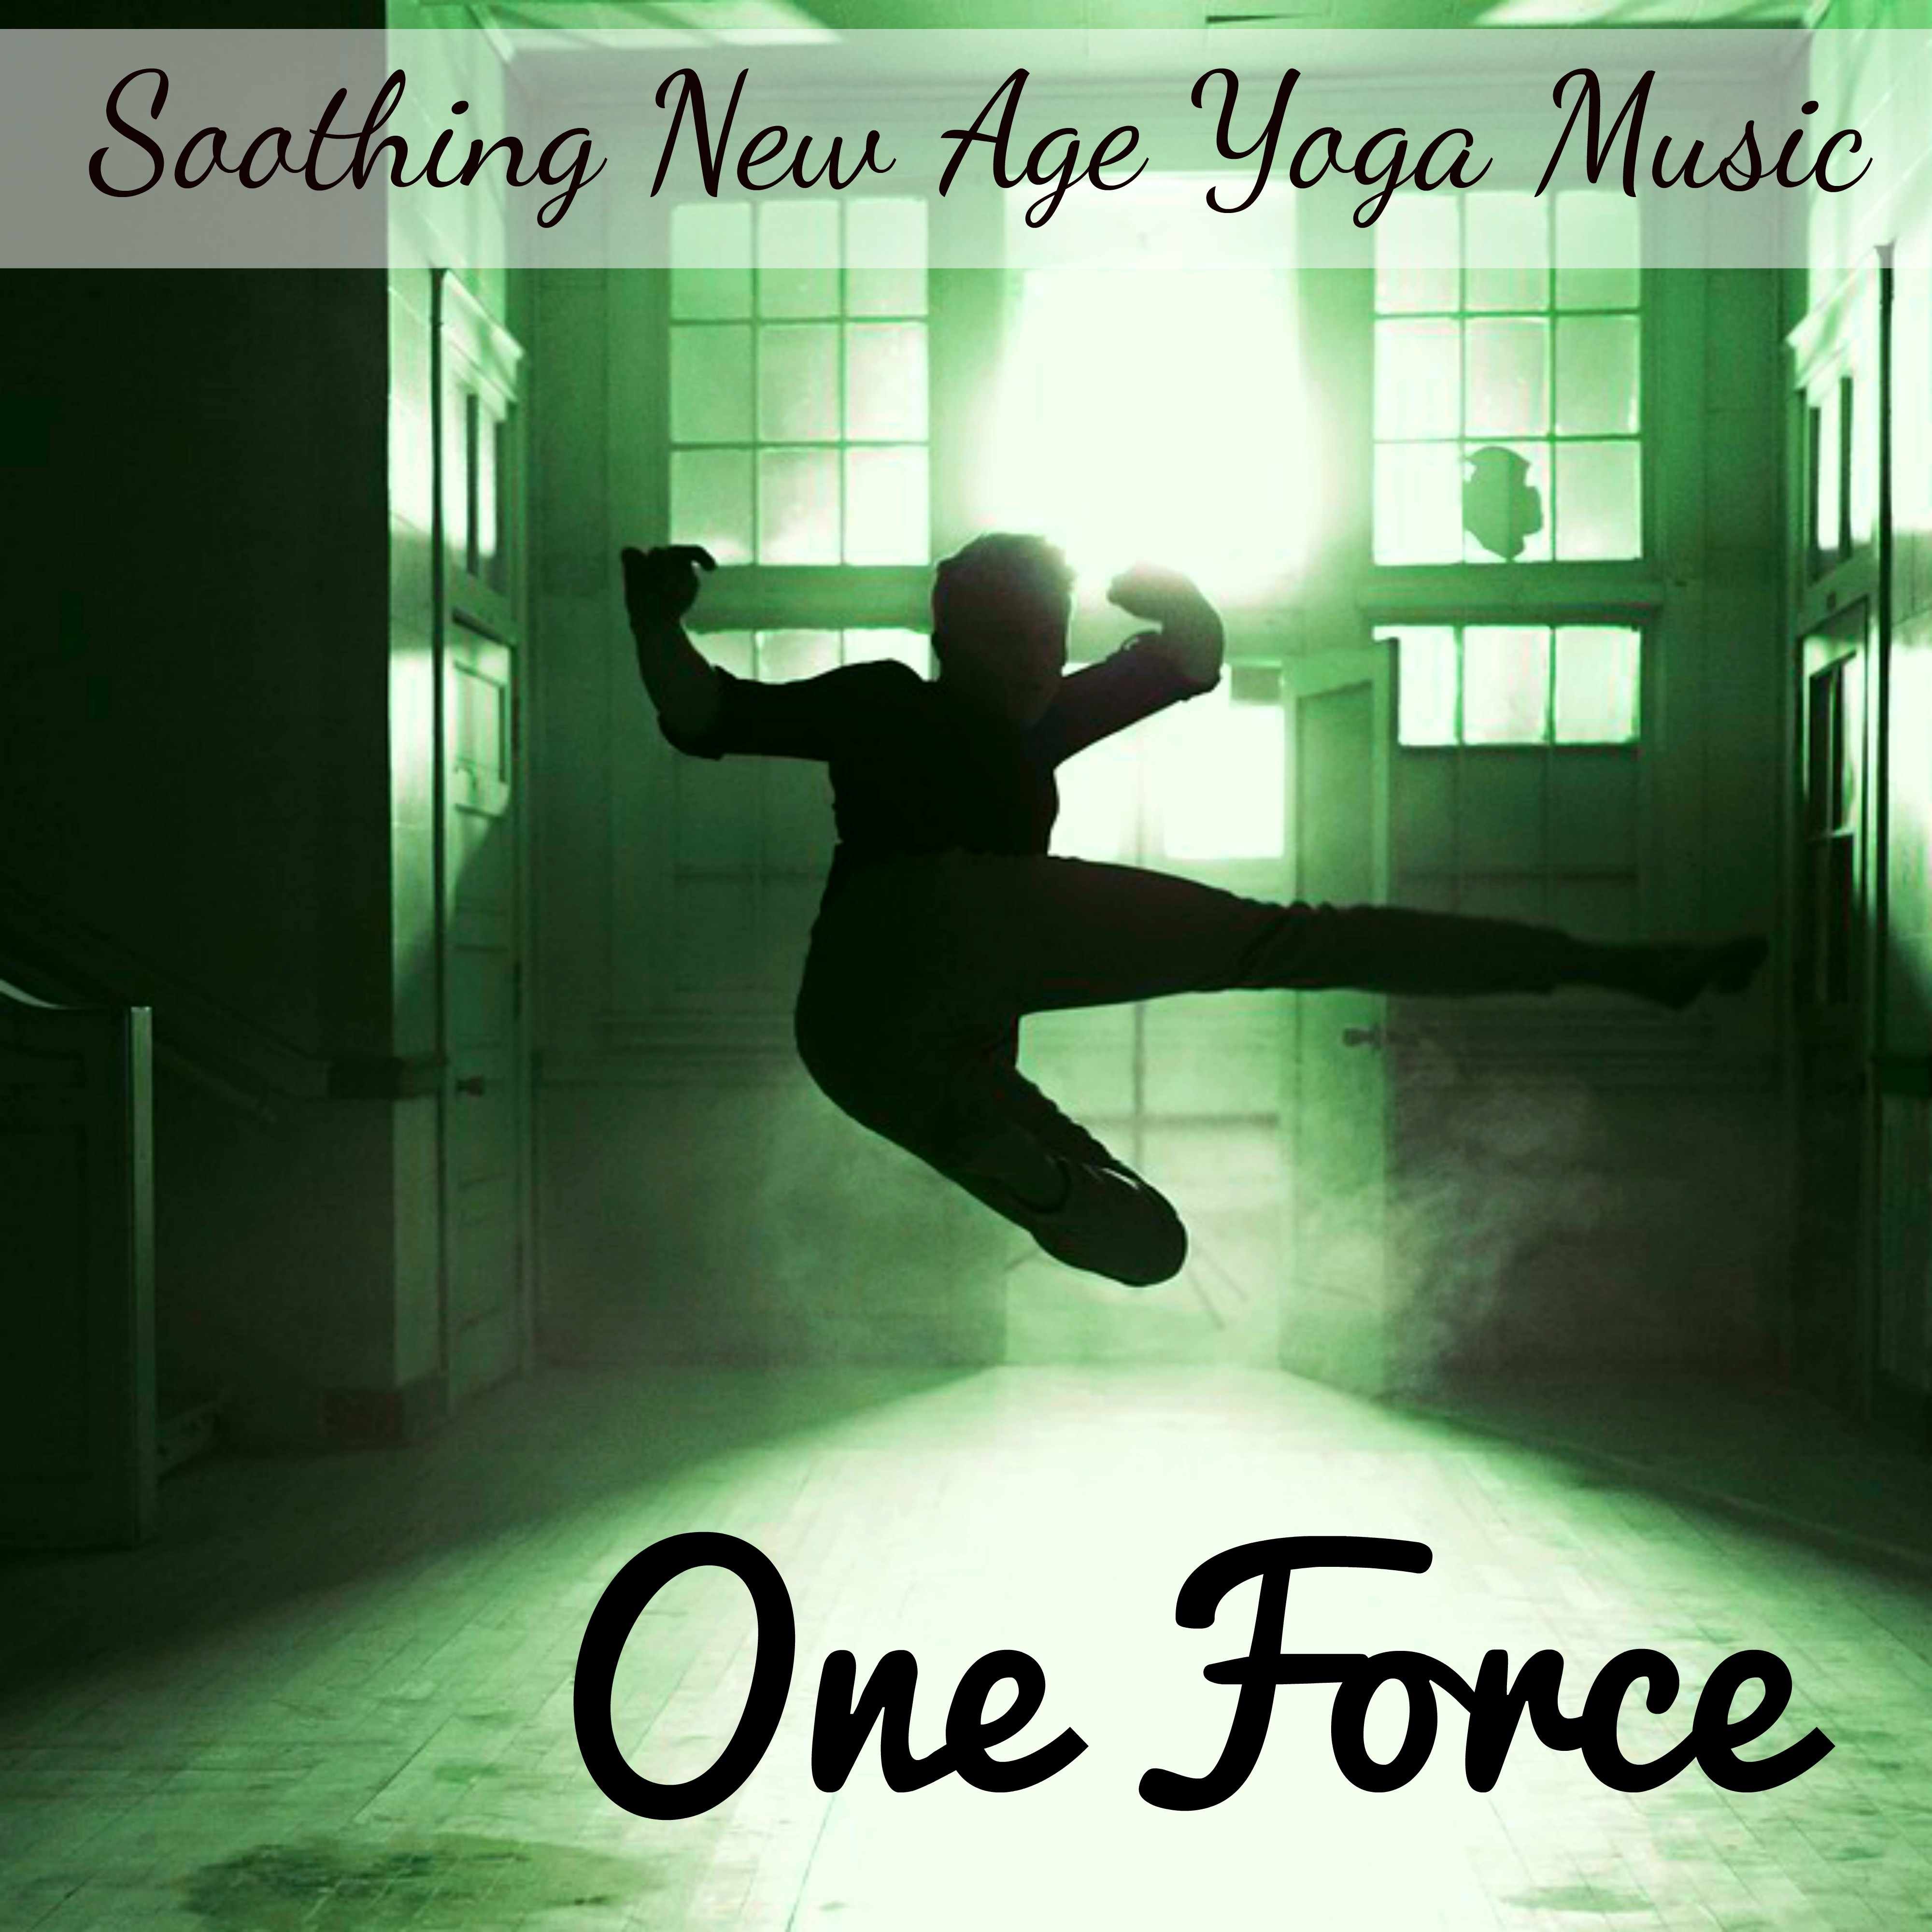 One Force - Soothing New Age Yoga Music for Massage Room Mental Exercise with Wellness Relaxing Instrumental Sounds